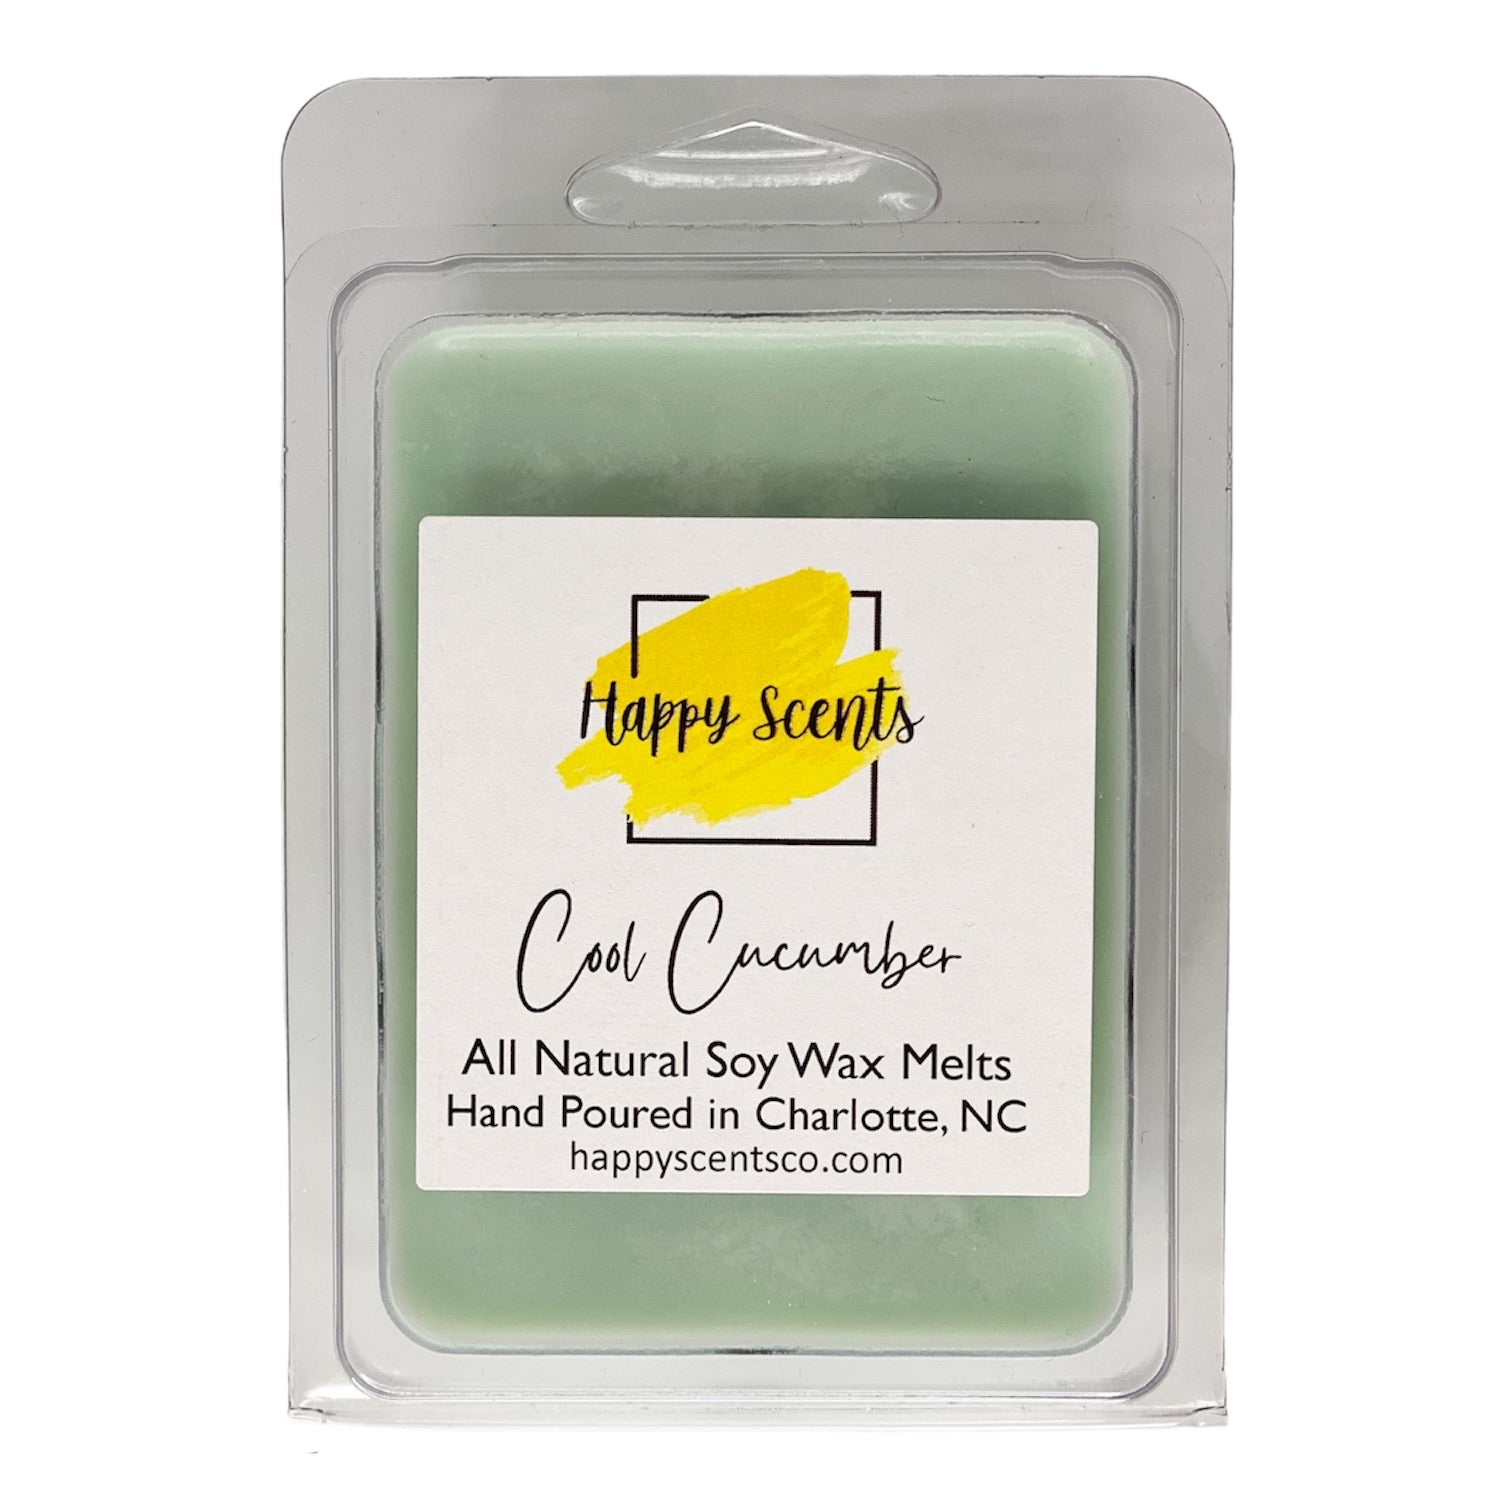 cool cucumber scented wax melts in a clamshell container